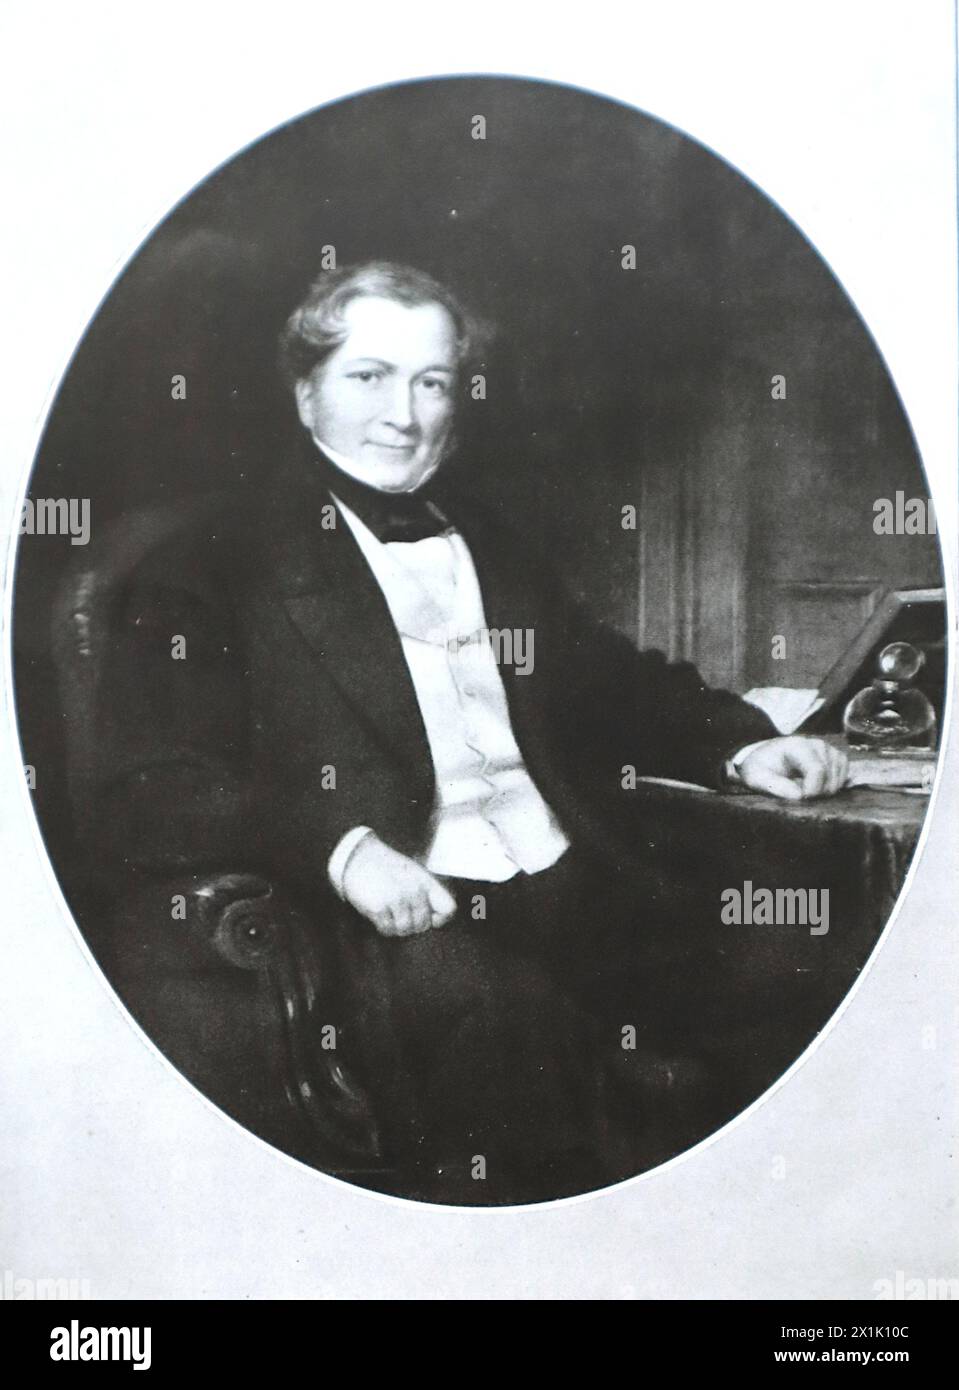 A portrait of John Heathcoat, born in Duffield, near Derby in 1783, died in Tiverton, 1861. He invented the first bobbin-net machine in 1809. This was published in 1924 by The Federation of Lace and Embroidery Employers’ Associations, Nottingham, for the British Empire Exhibition. Stock Photo